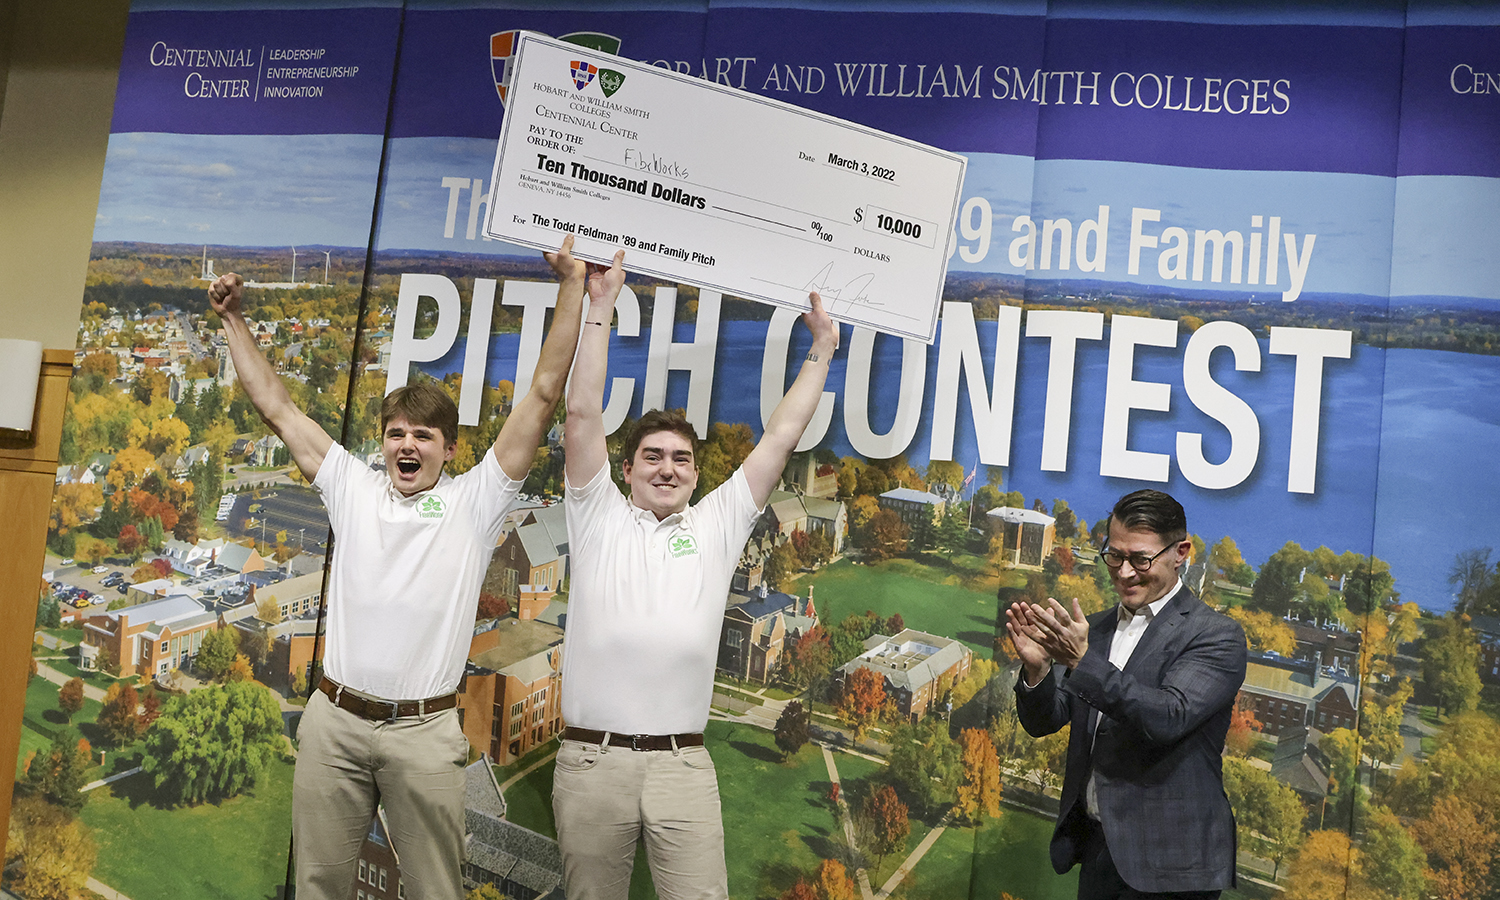 The Pitch winners hoist a check over their heads.